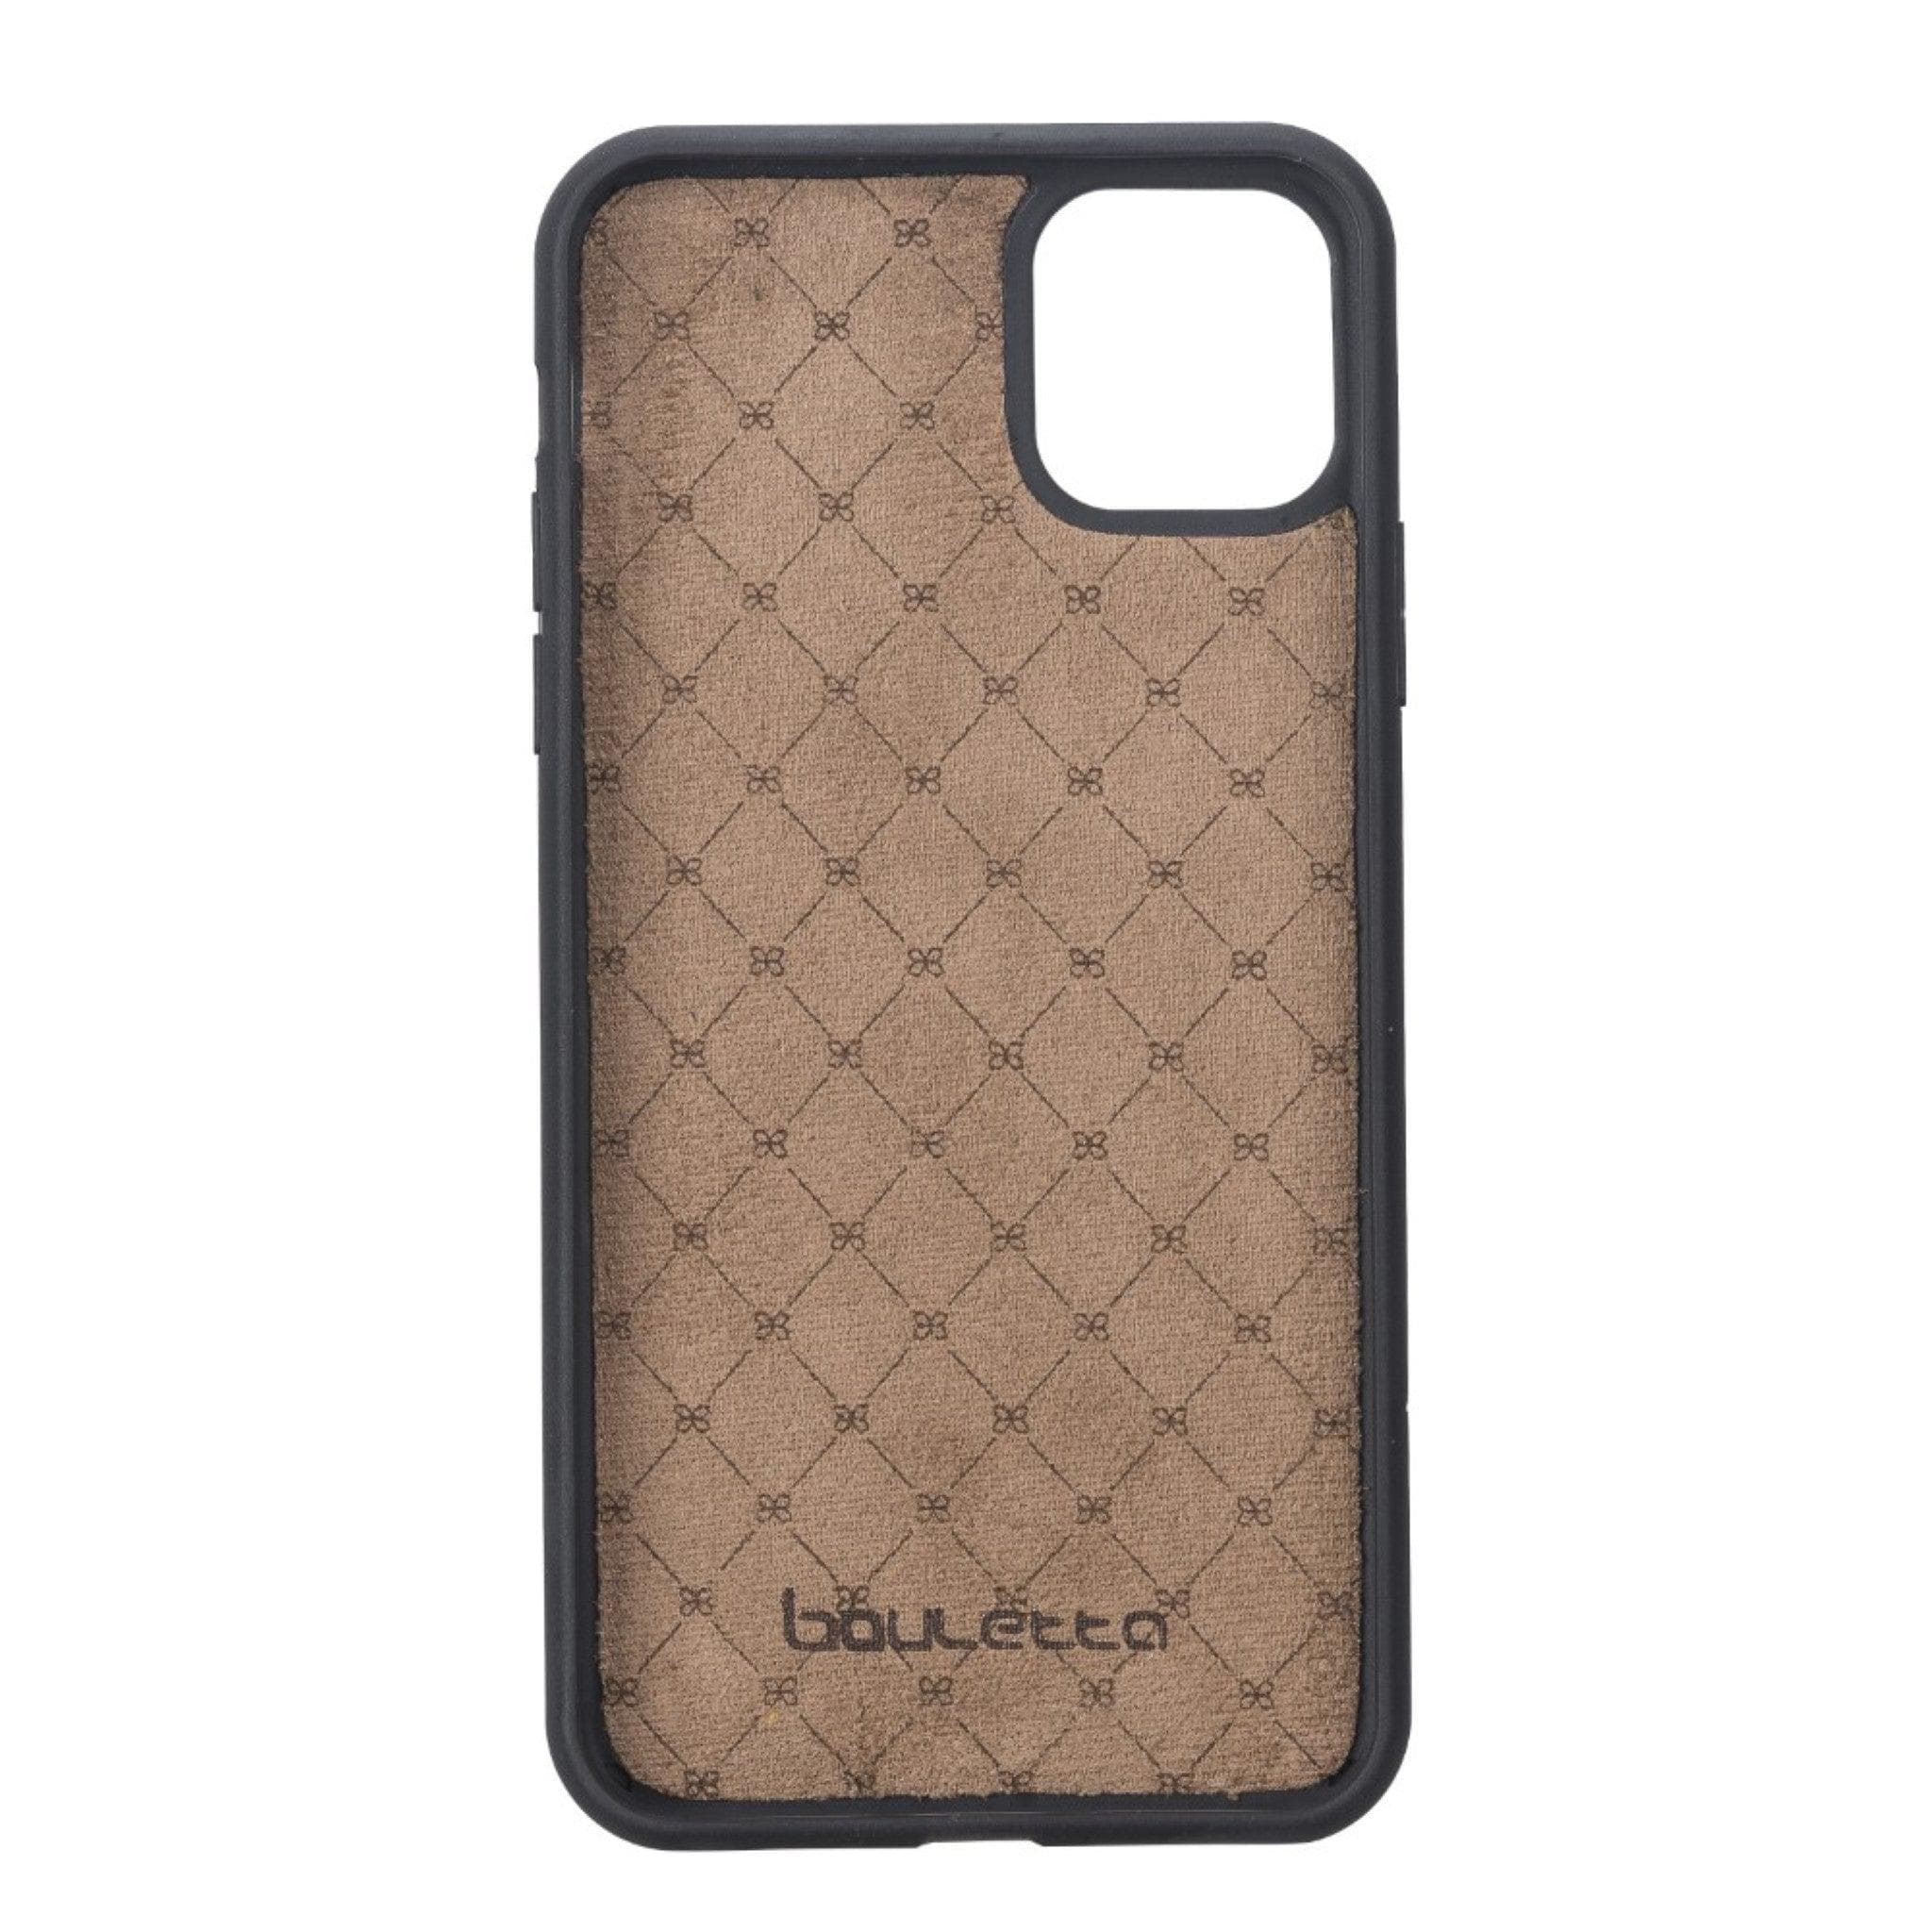 Flex Cover Leather Back Cover Case for Apple iPhone 11 Series Bouletta LTD